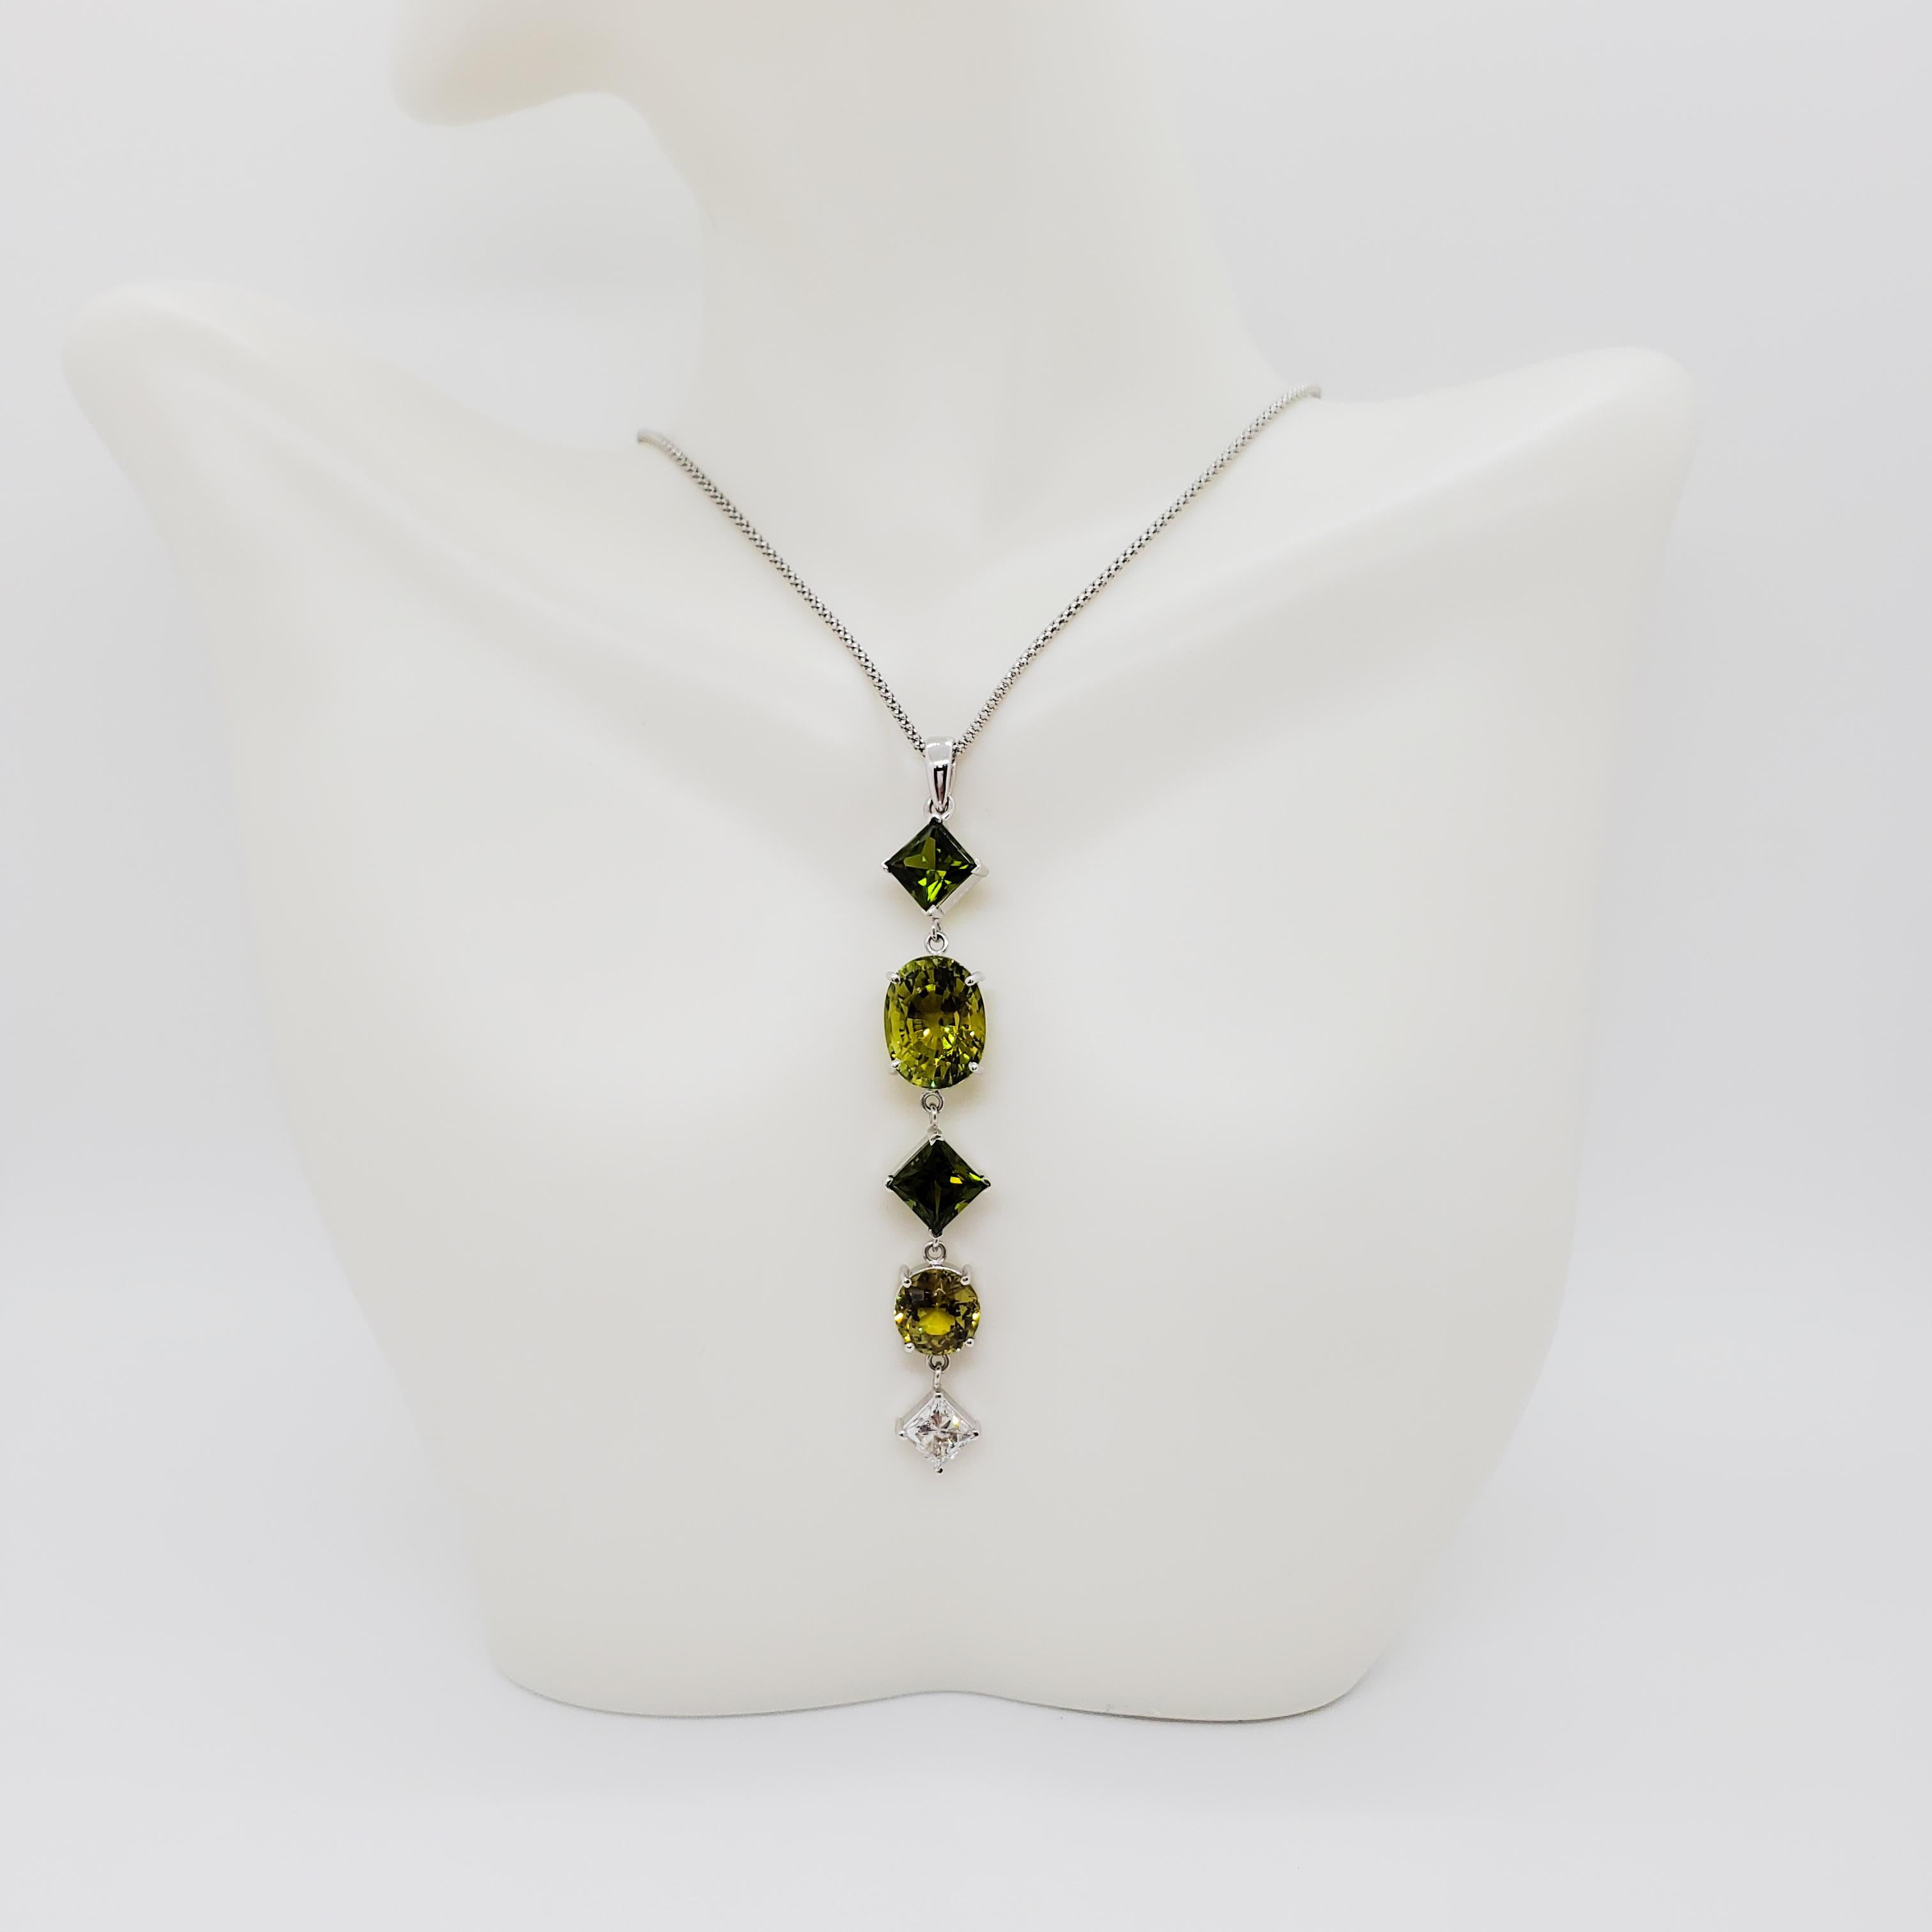 Beautiful necklace showcasing a 8.52 ct. green tourmaline oval and two 7.70 ct. green sphene stones.  0.93 ct. good quality white diamonds. 18